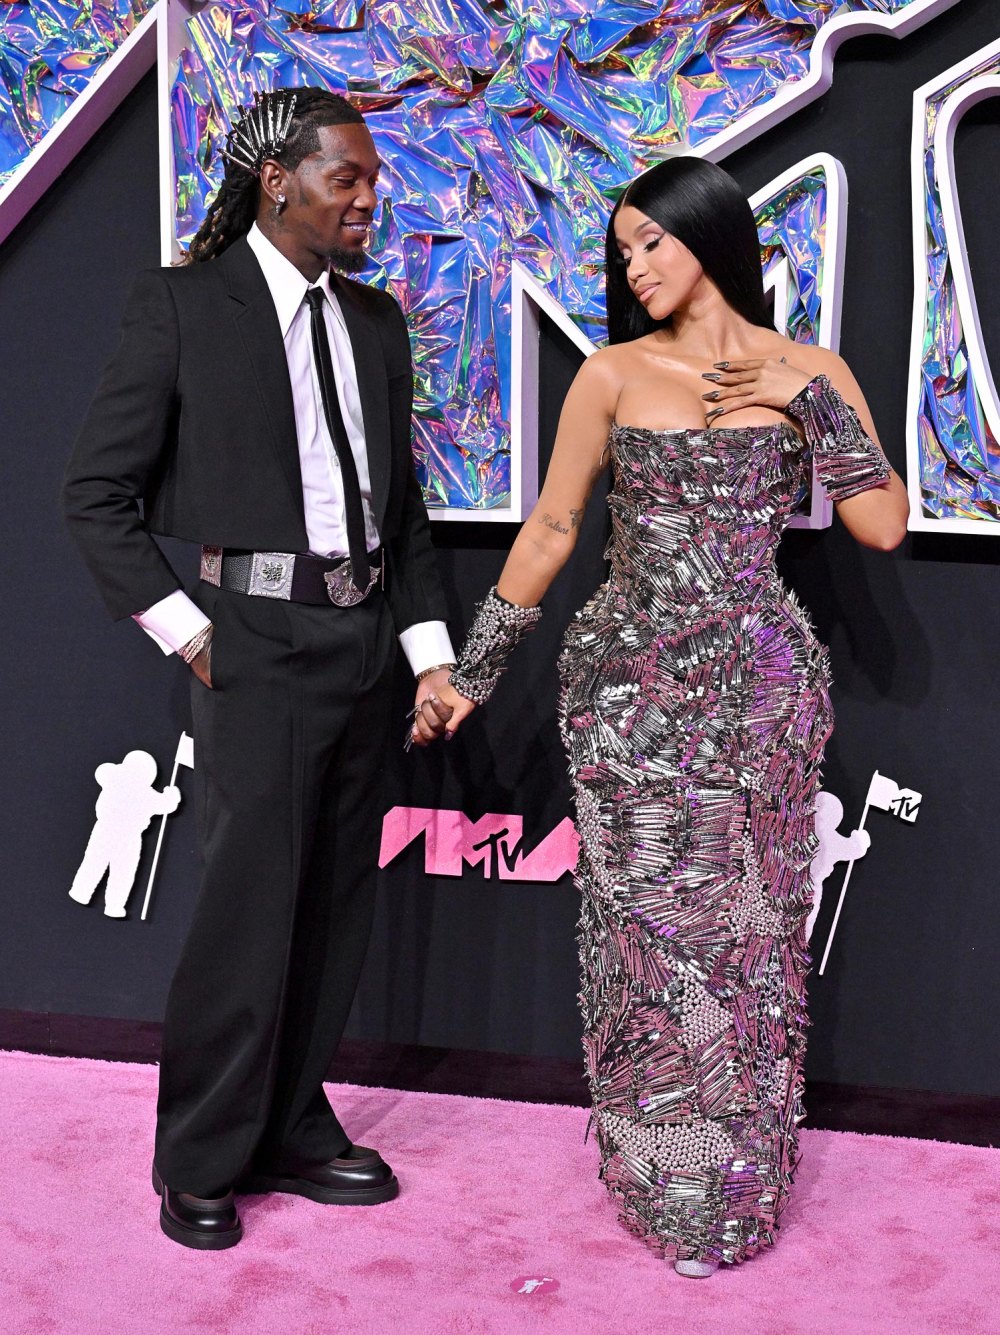 Inside Cardi B and Offset’s Tumultuous’ Relationship Pattern This Breakup Feels Different’ 999 inline